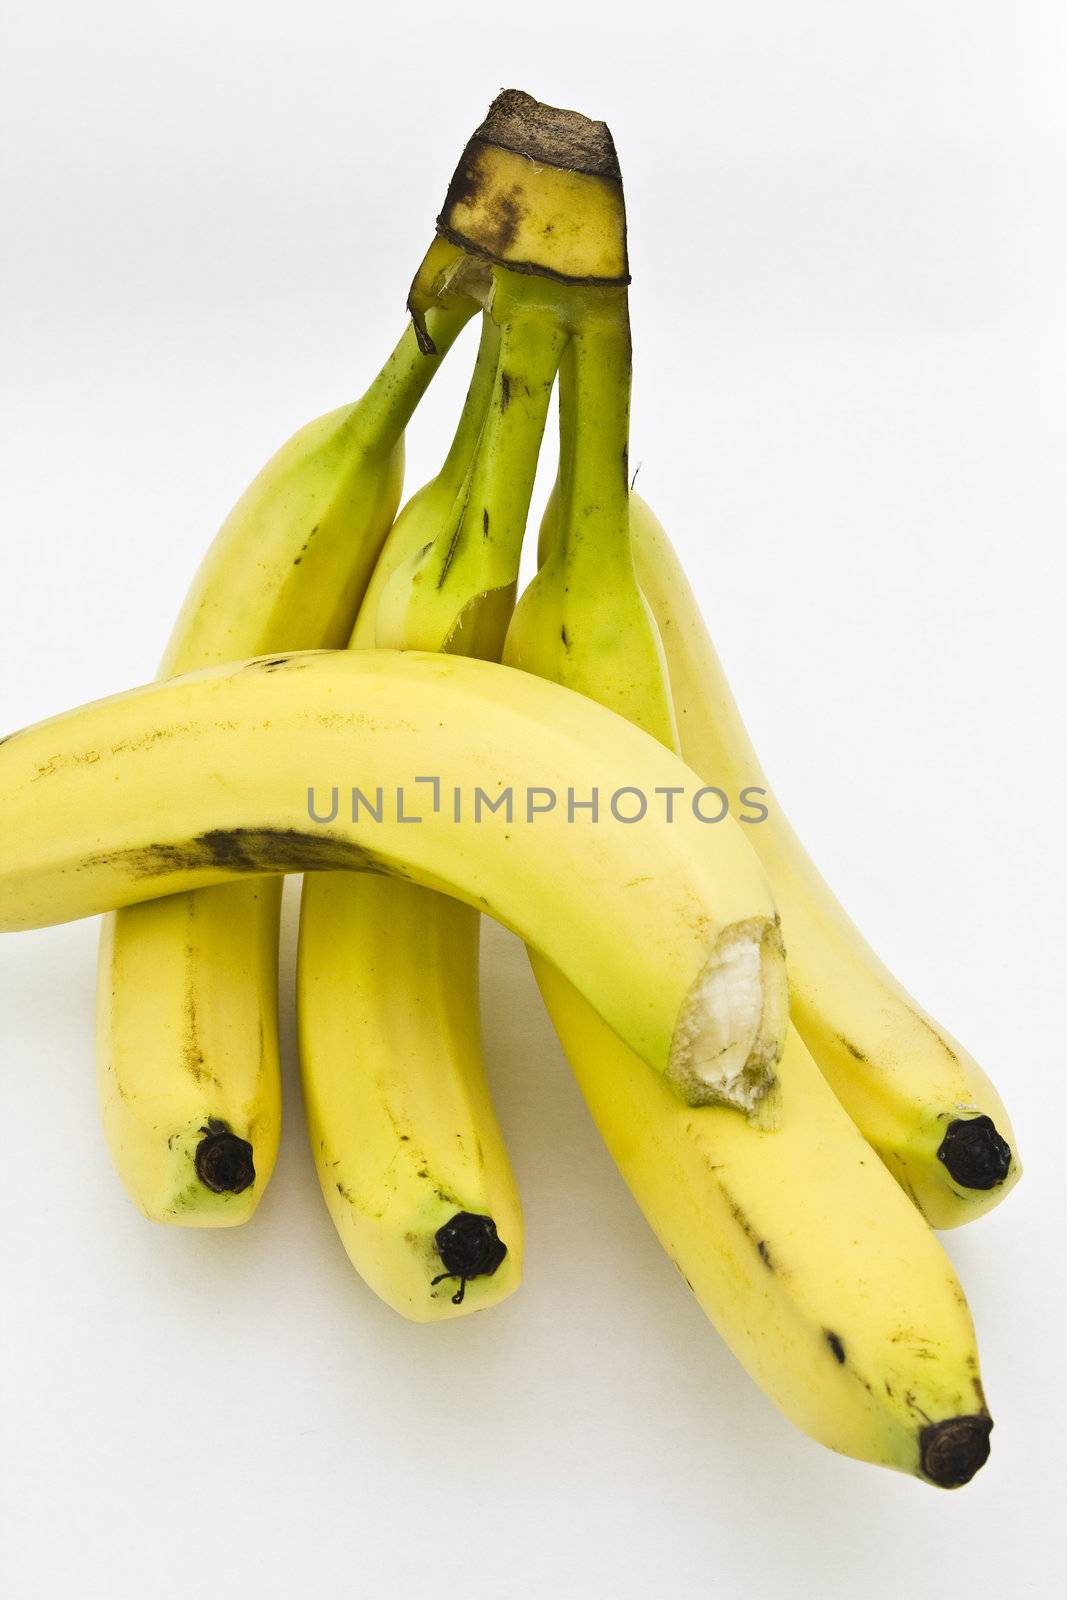 A perfect bunch of bananas, this file comes with a clipping path